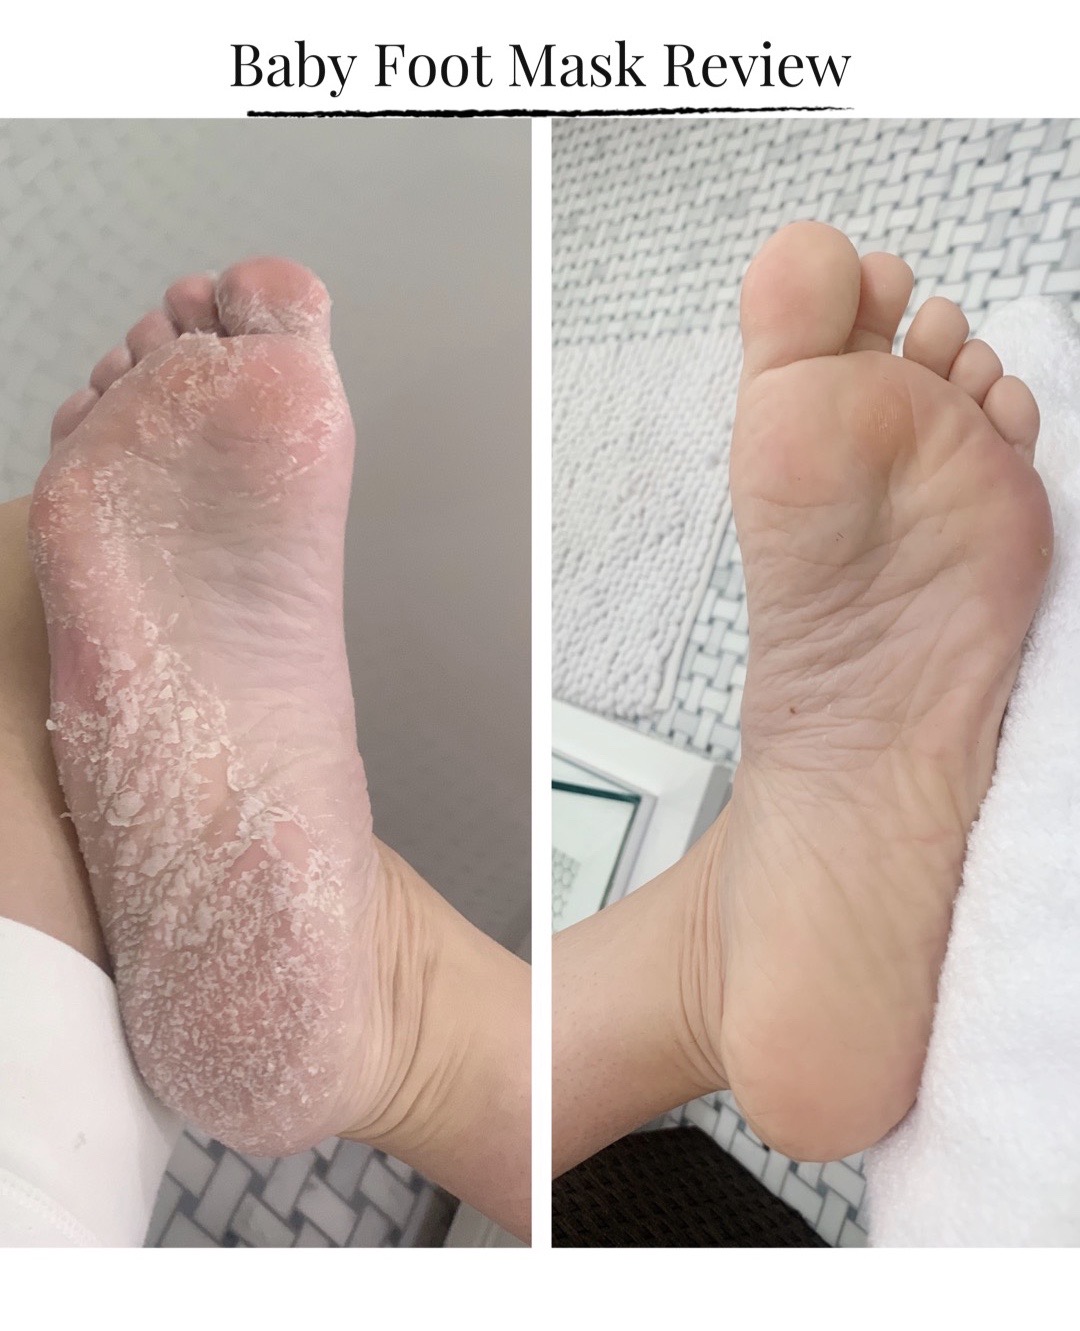 foot peel mask before and after